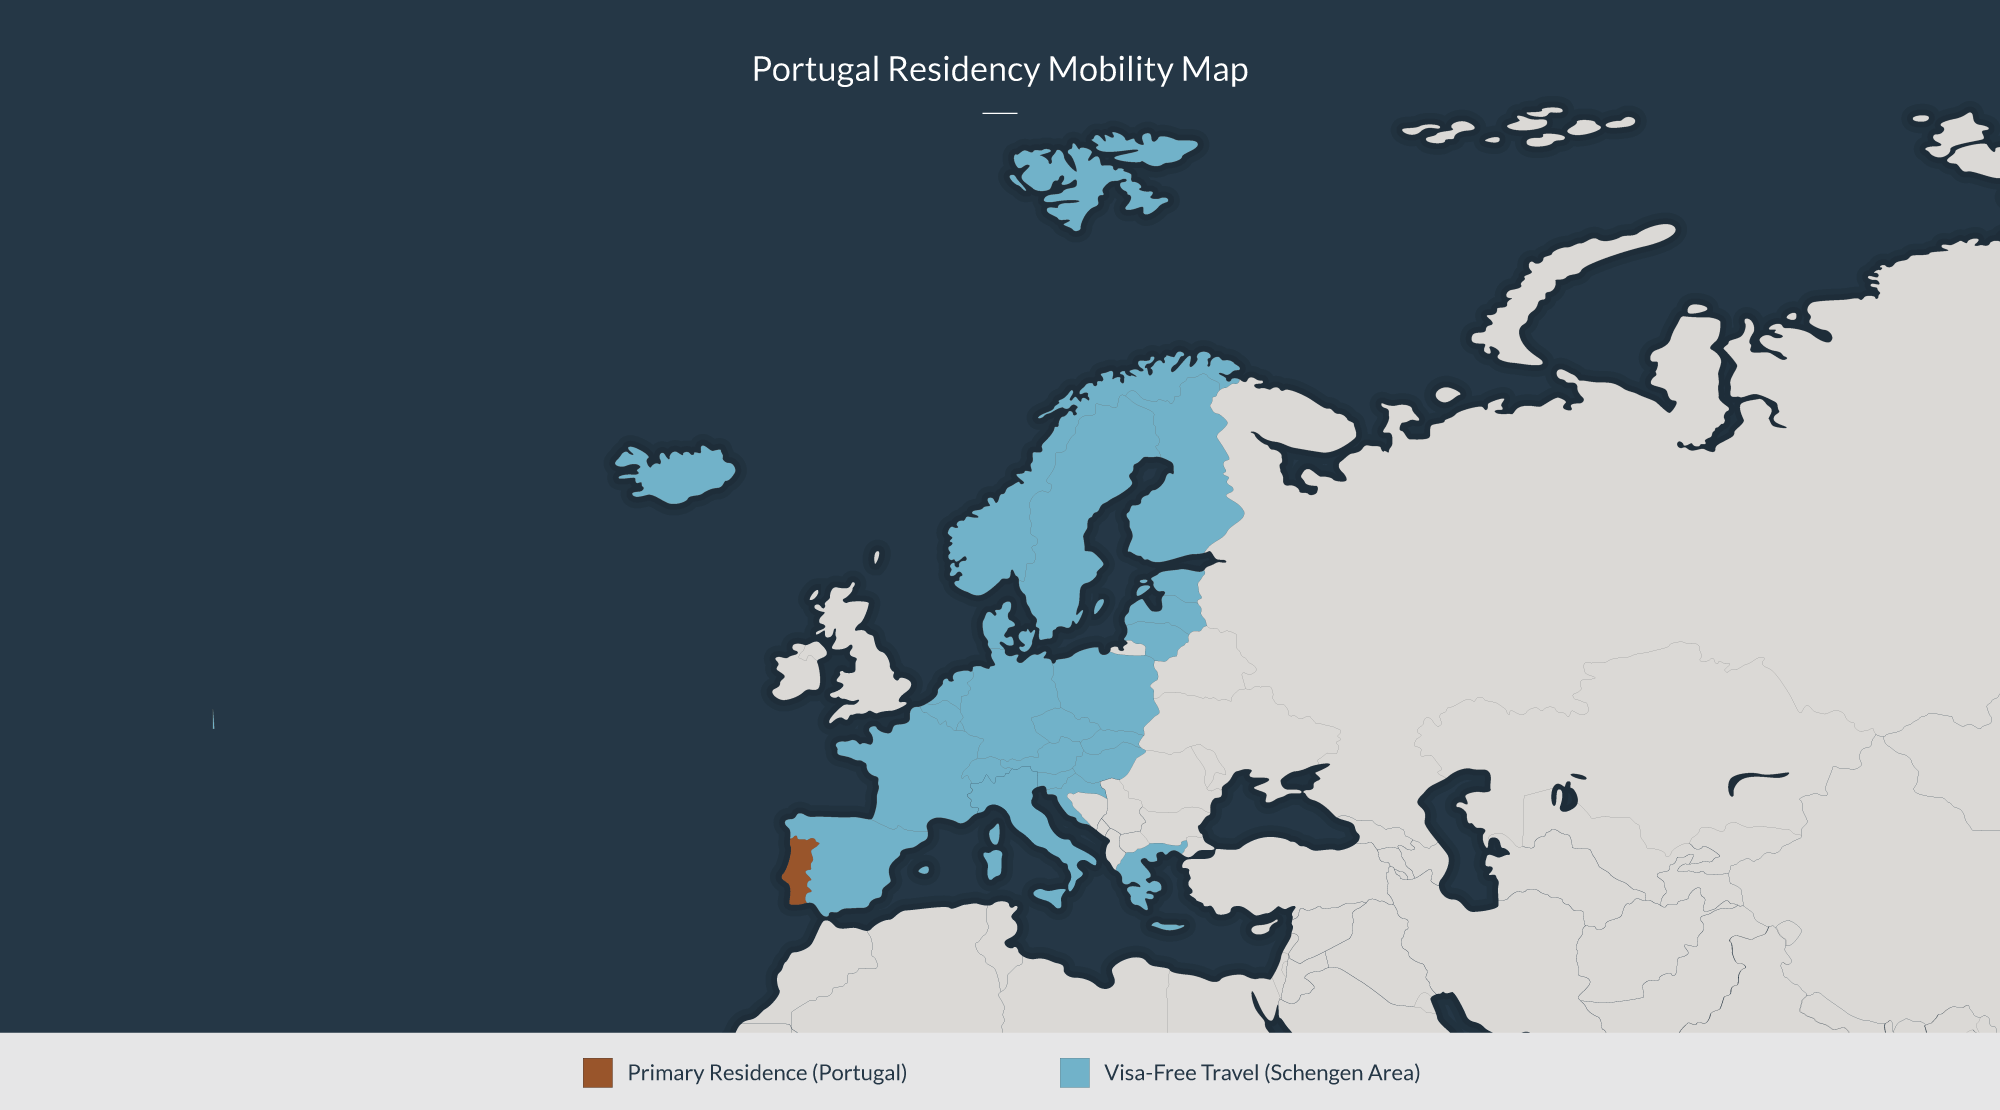 Portugal residency mobility map: Primary residence in Portugal, Visa-free travel across the Schengen area.